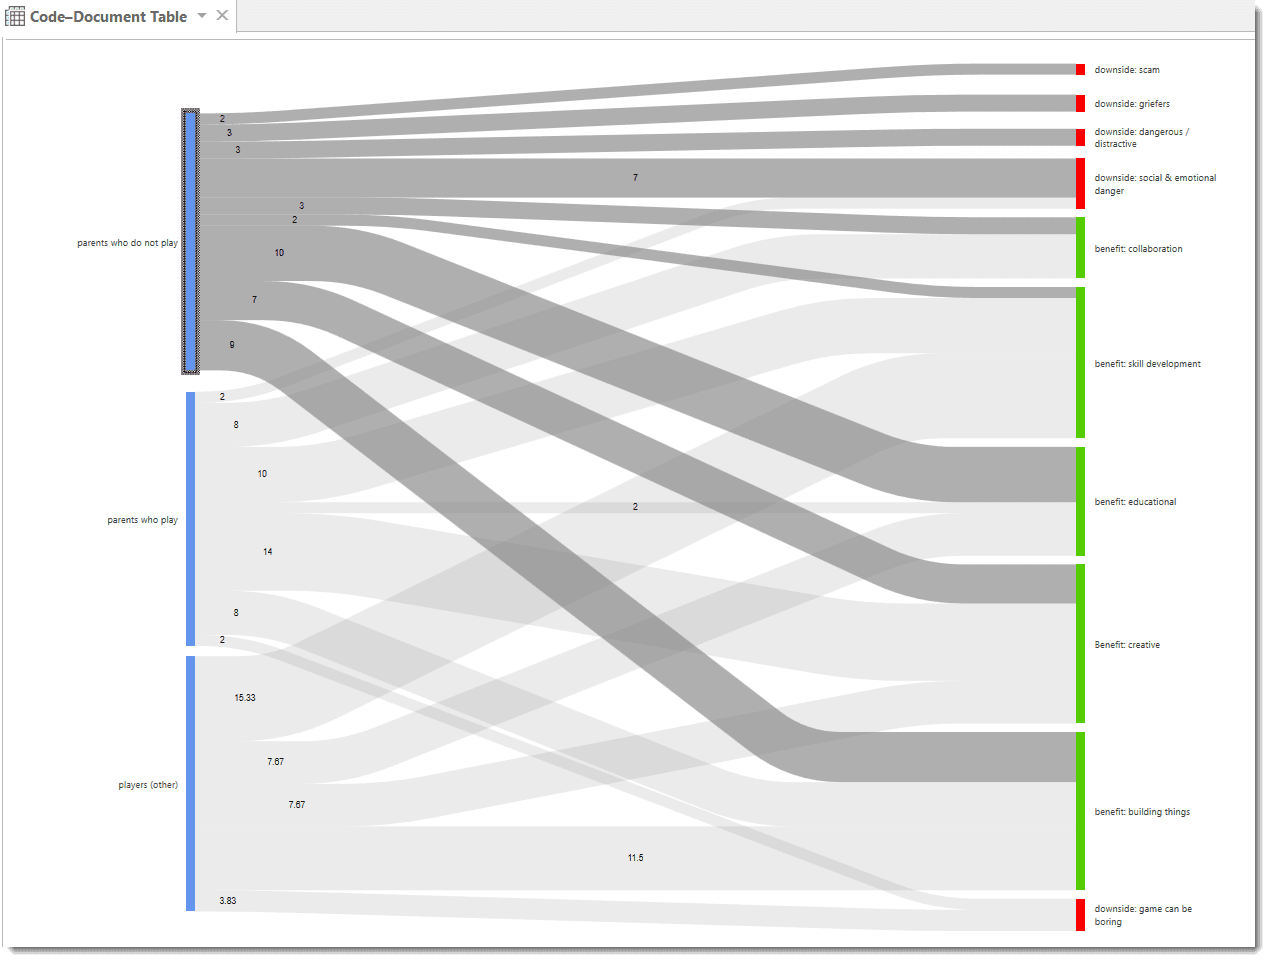 Sankey Diagram for the Code-Document Table